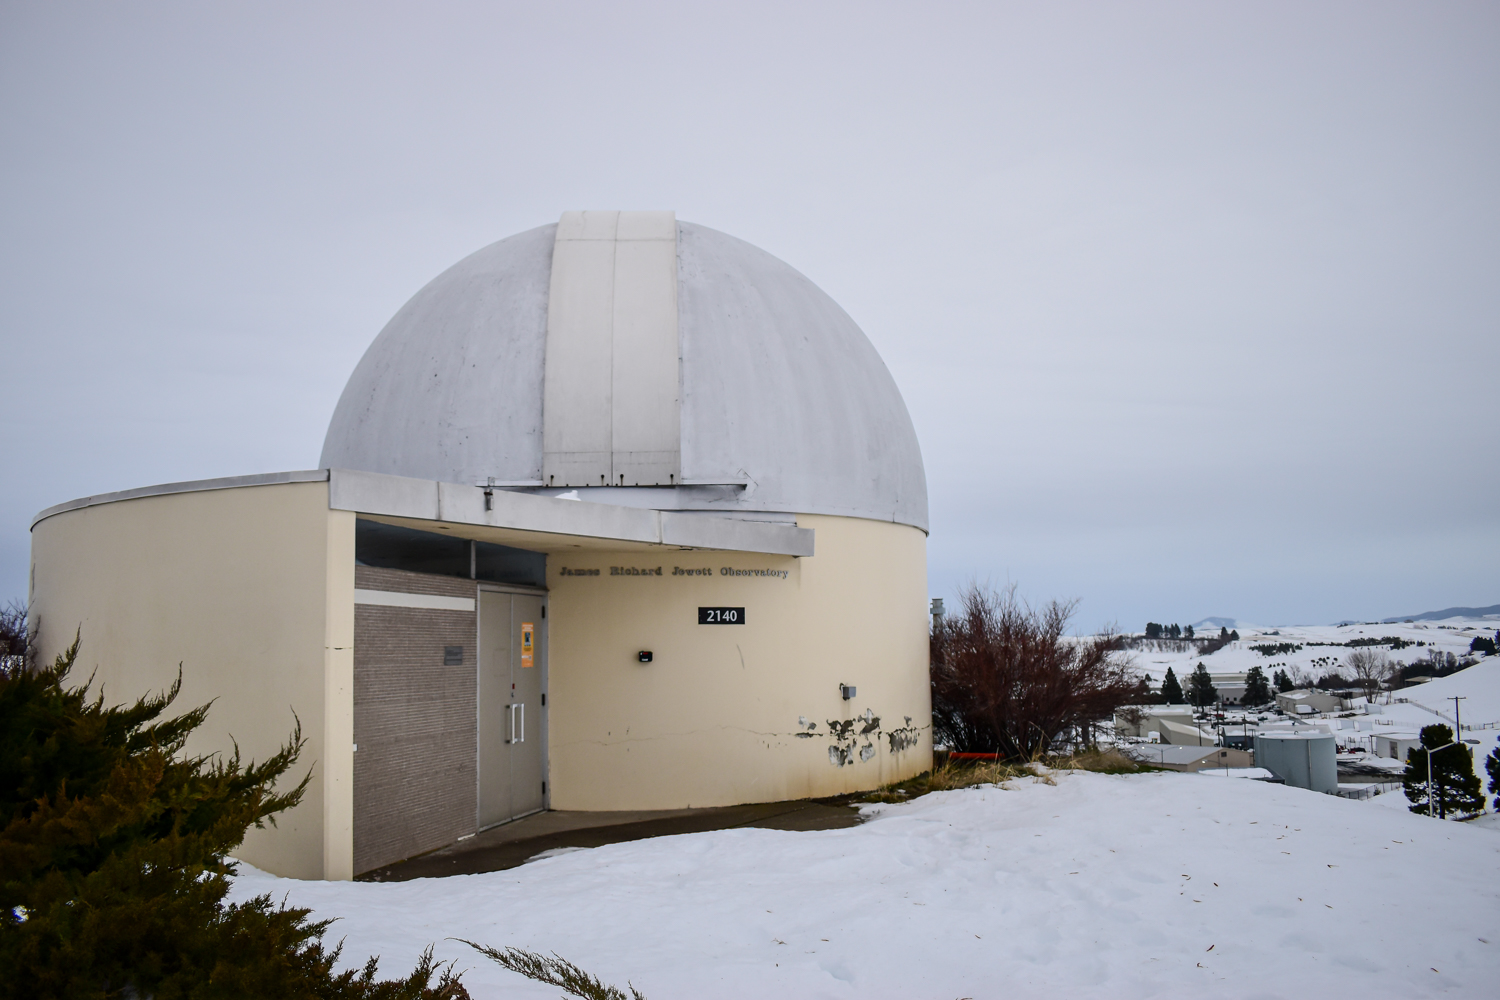 Jewett Observatory introduces public to other worlds